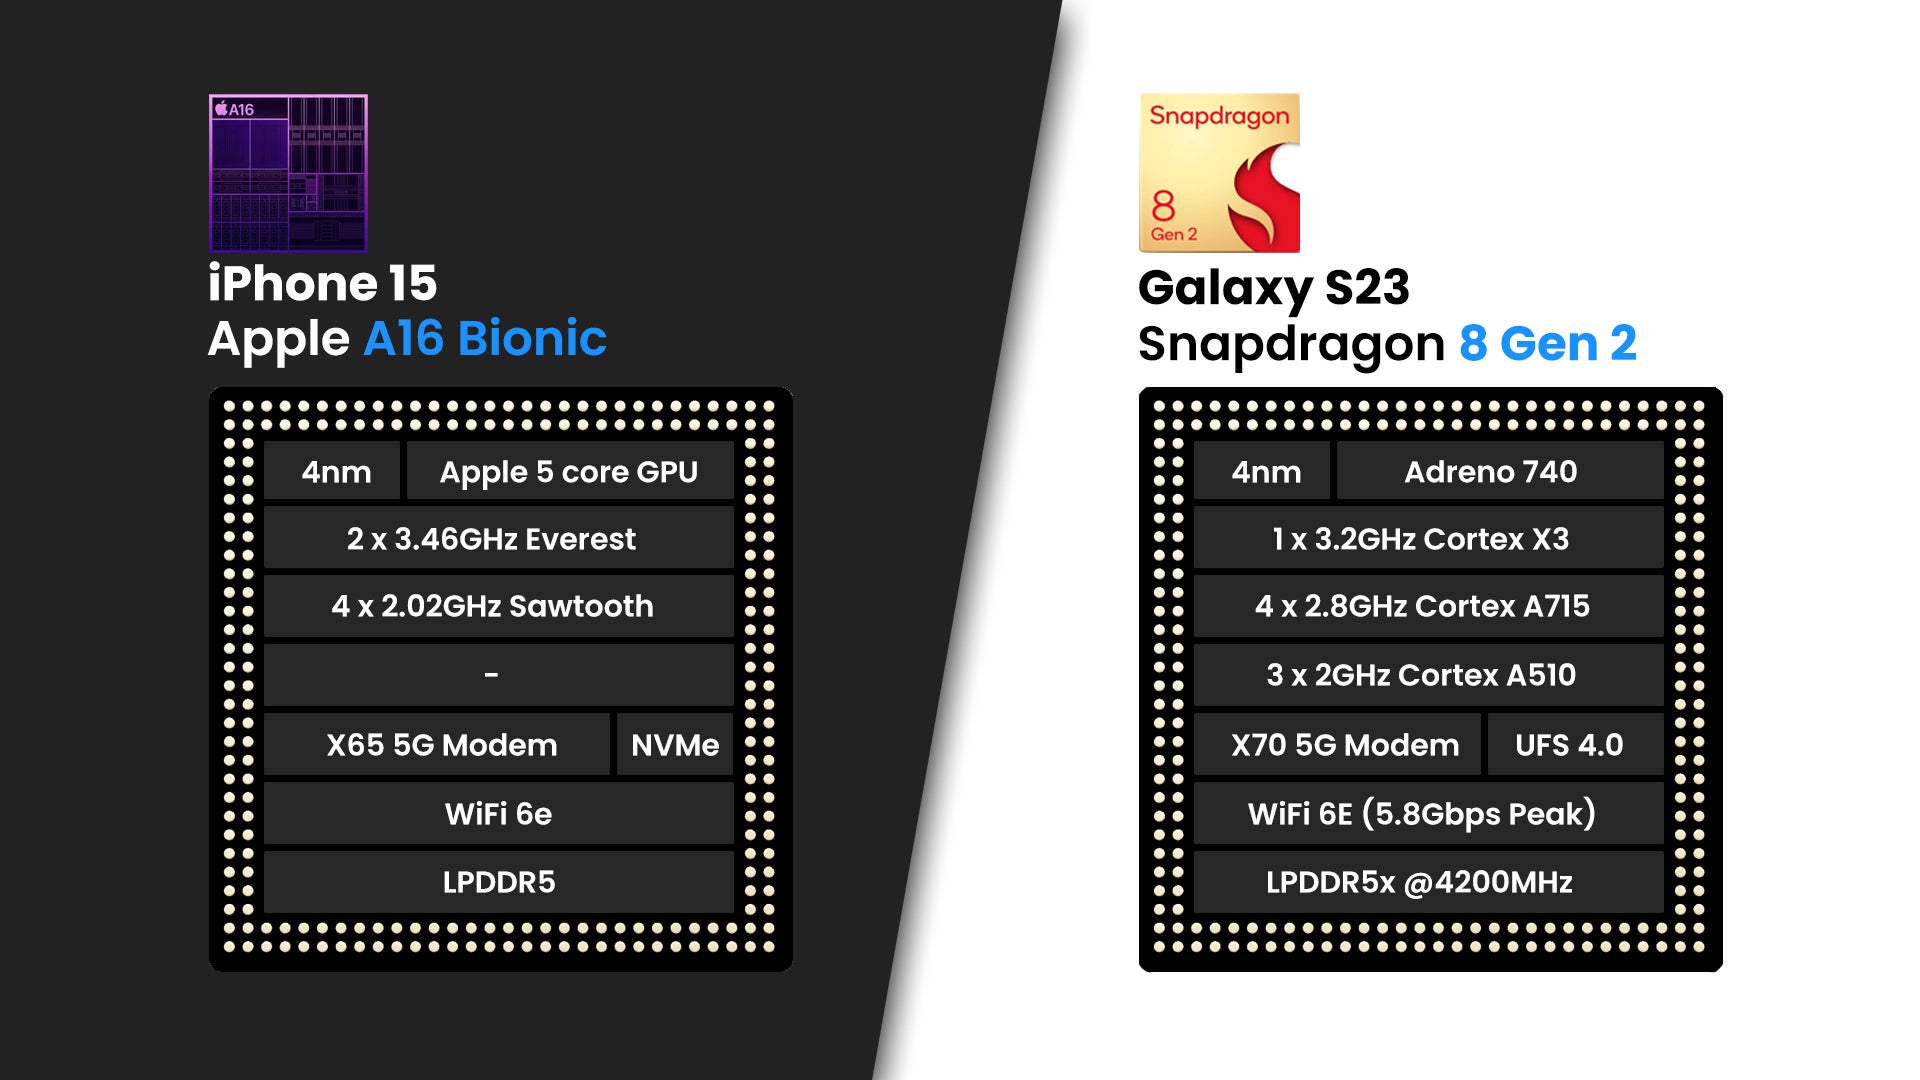 iPhone 15 vs Galaxy S23: which base model is better?